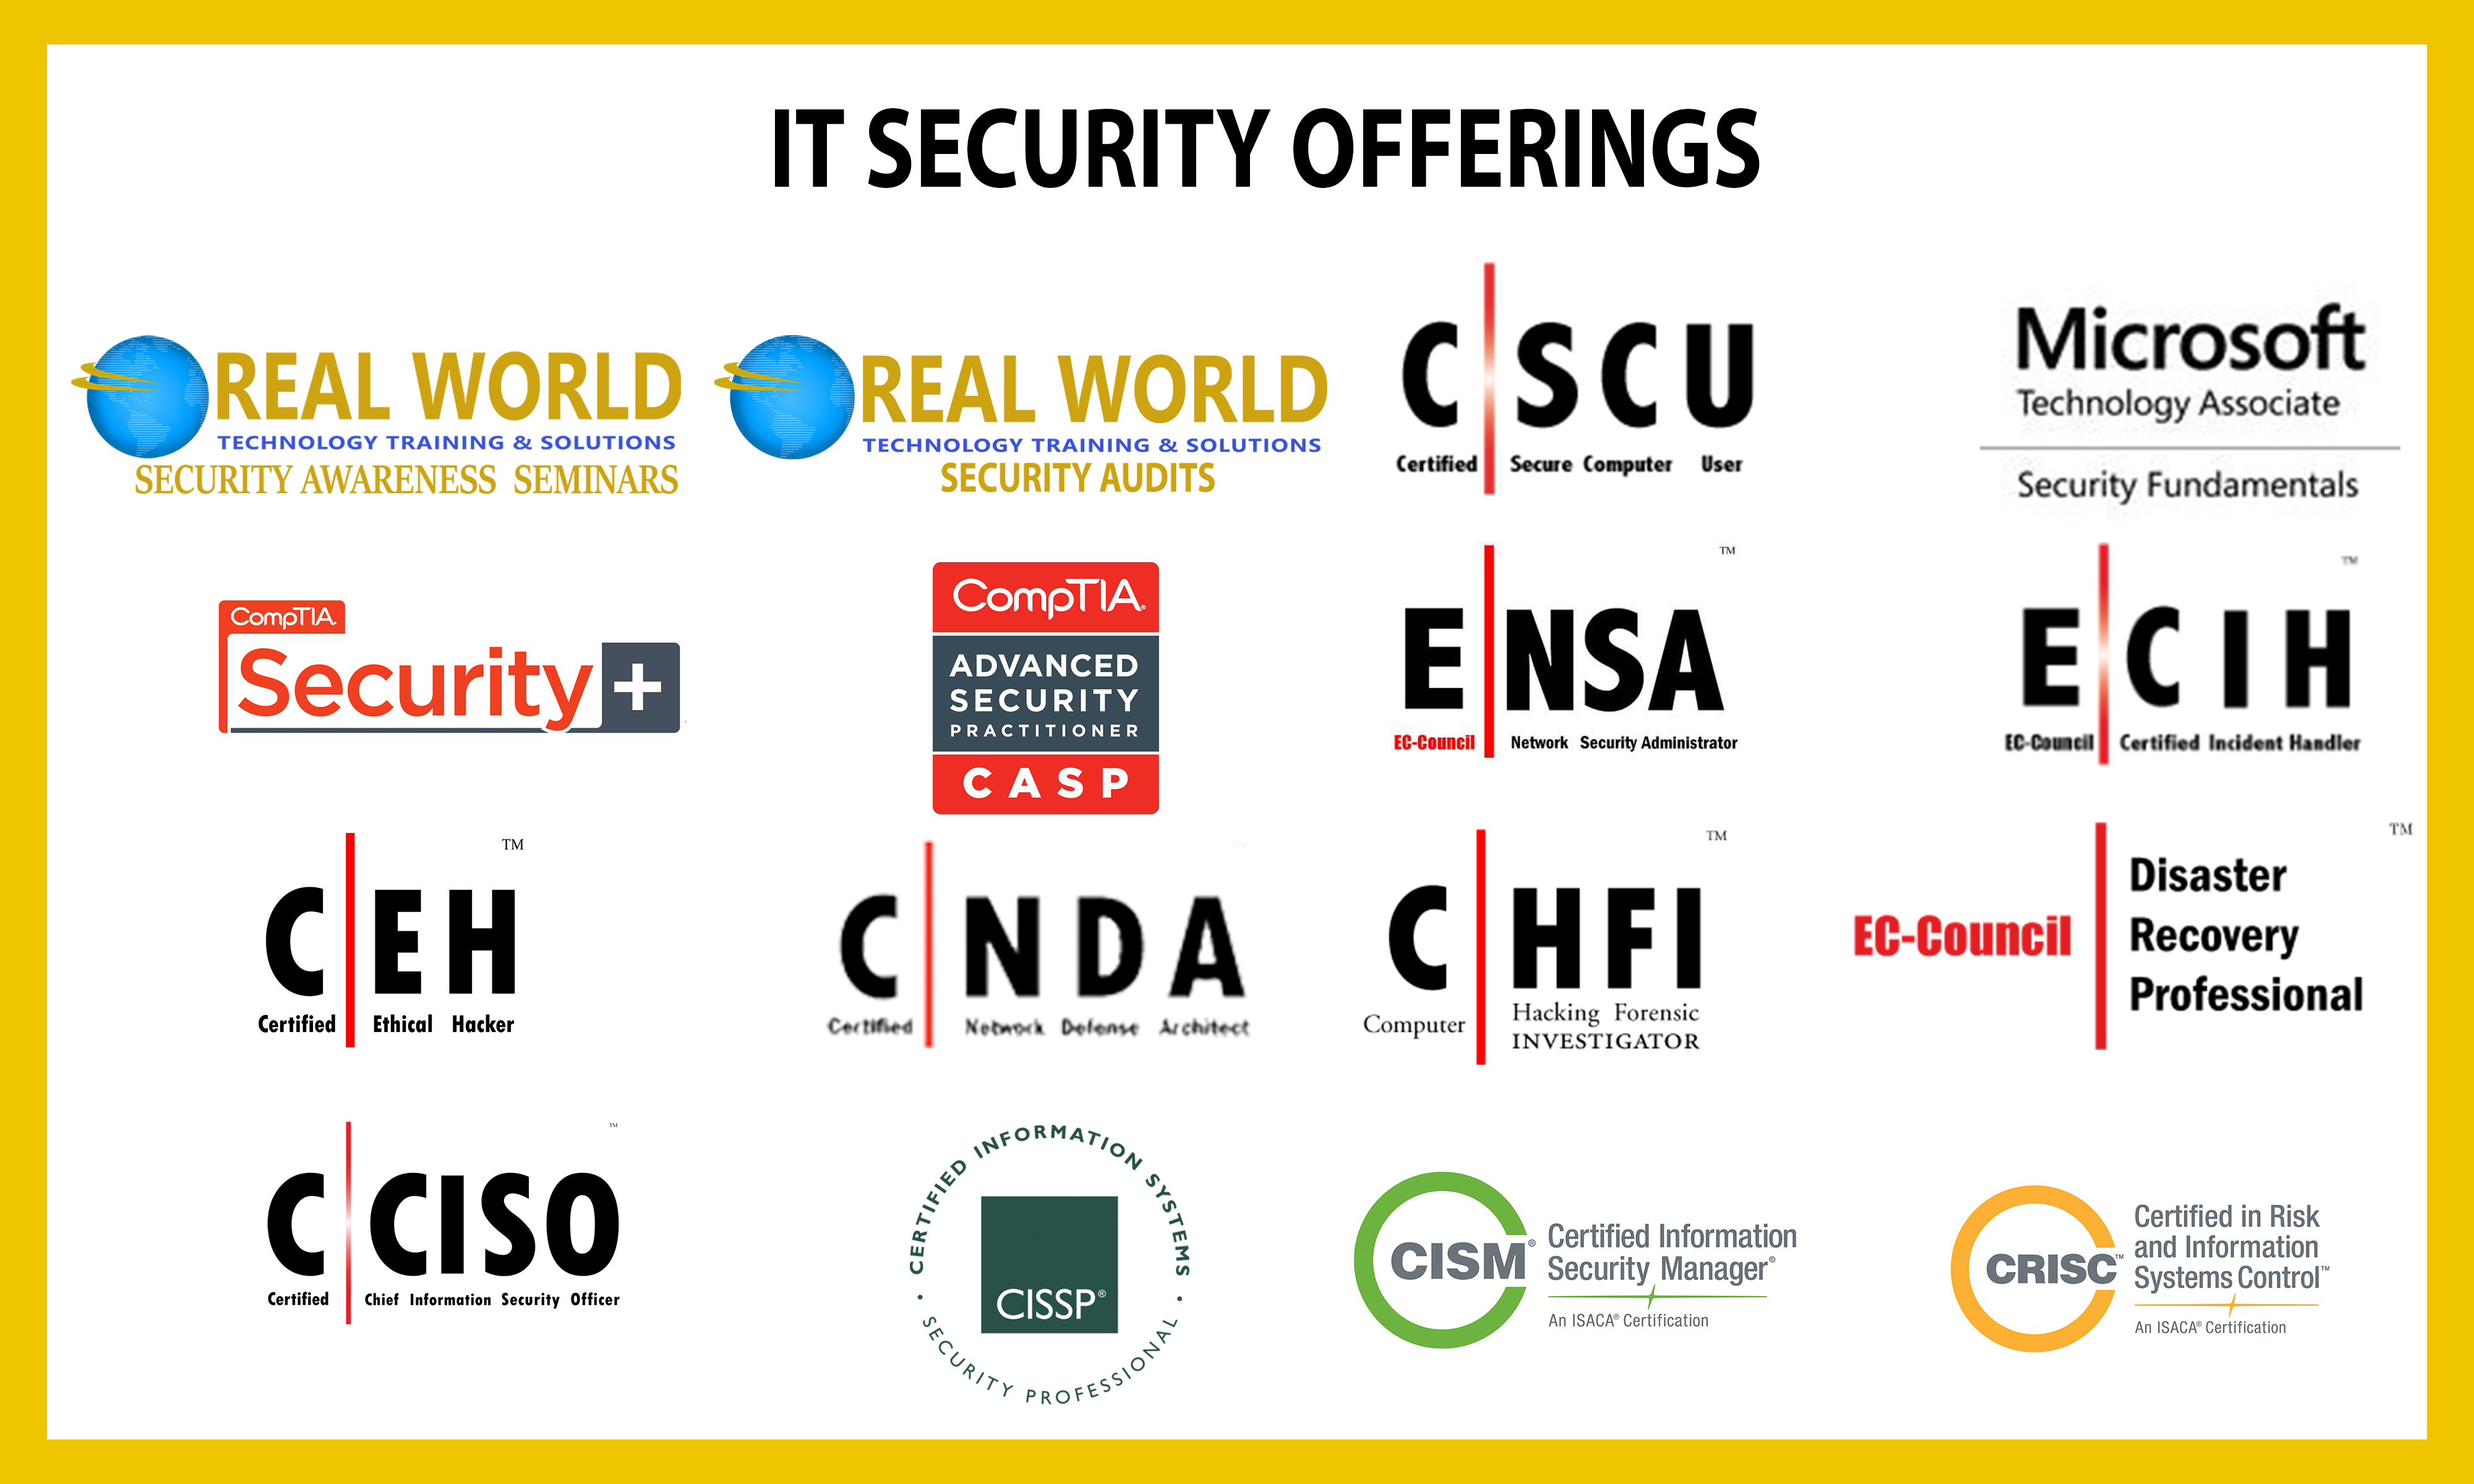 RWTTS Is Pleased To Provide World Class Training In IT Security